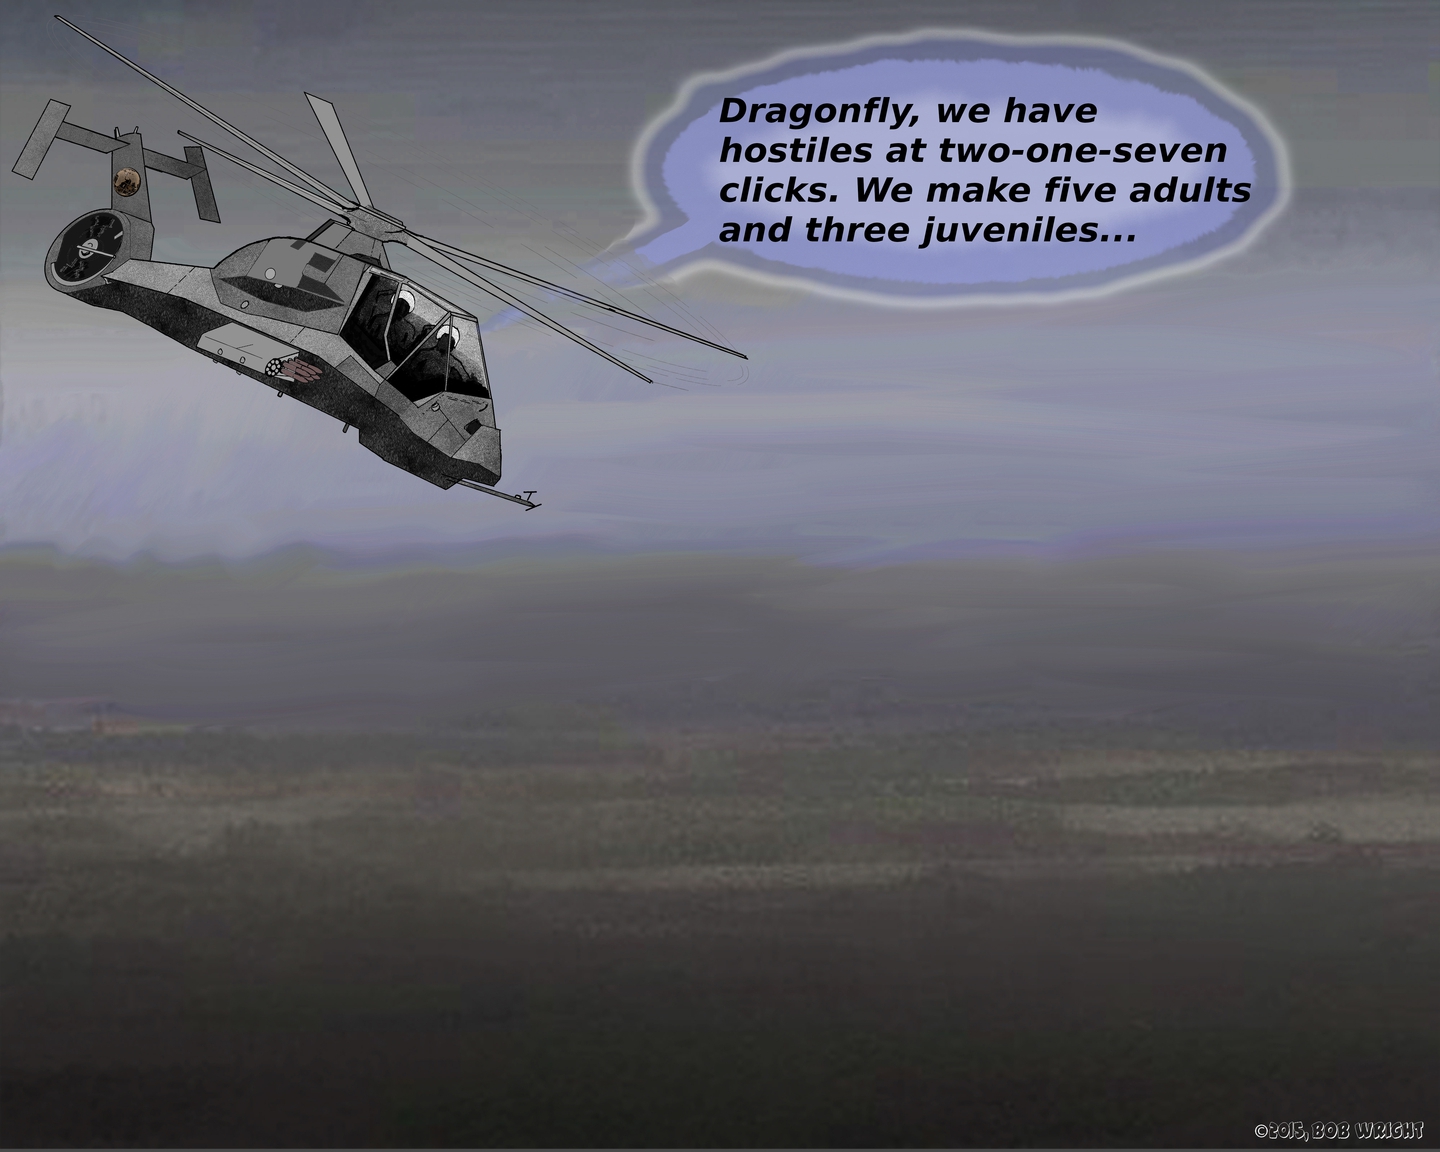 Hornet over hazy terrain with radio text, "Dragonfly, we have hostiles at two-one-seven clicks. We make five adults and three juveniles..."